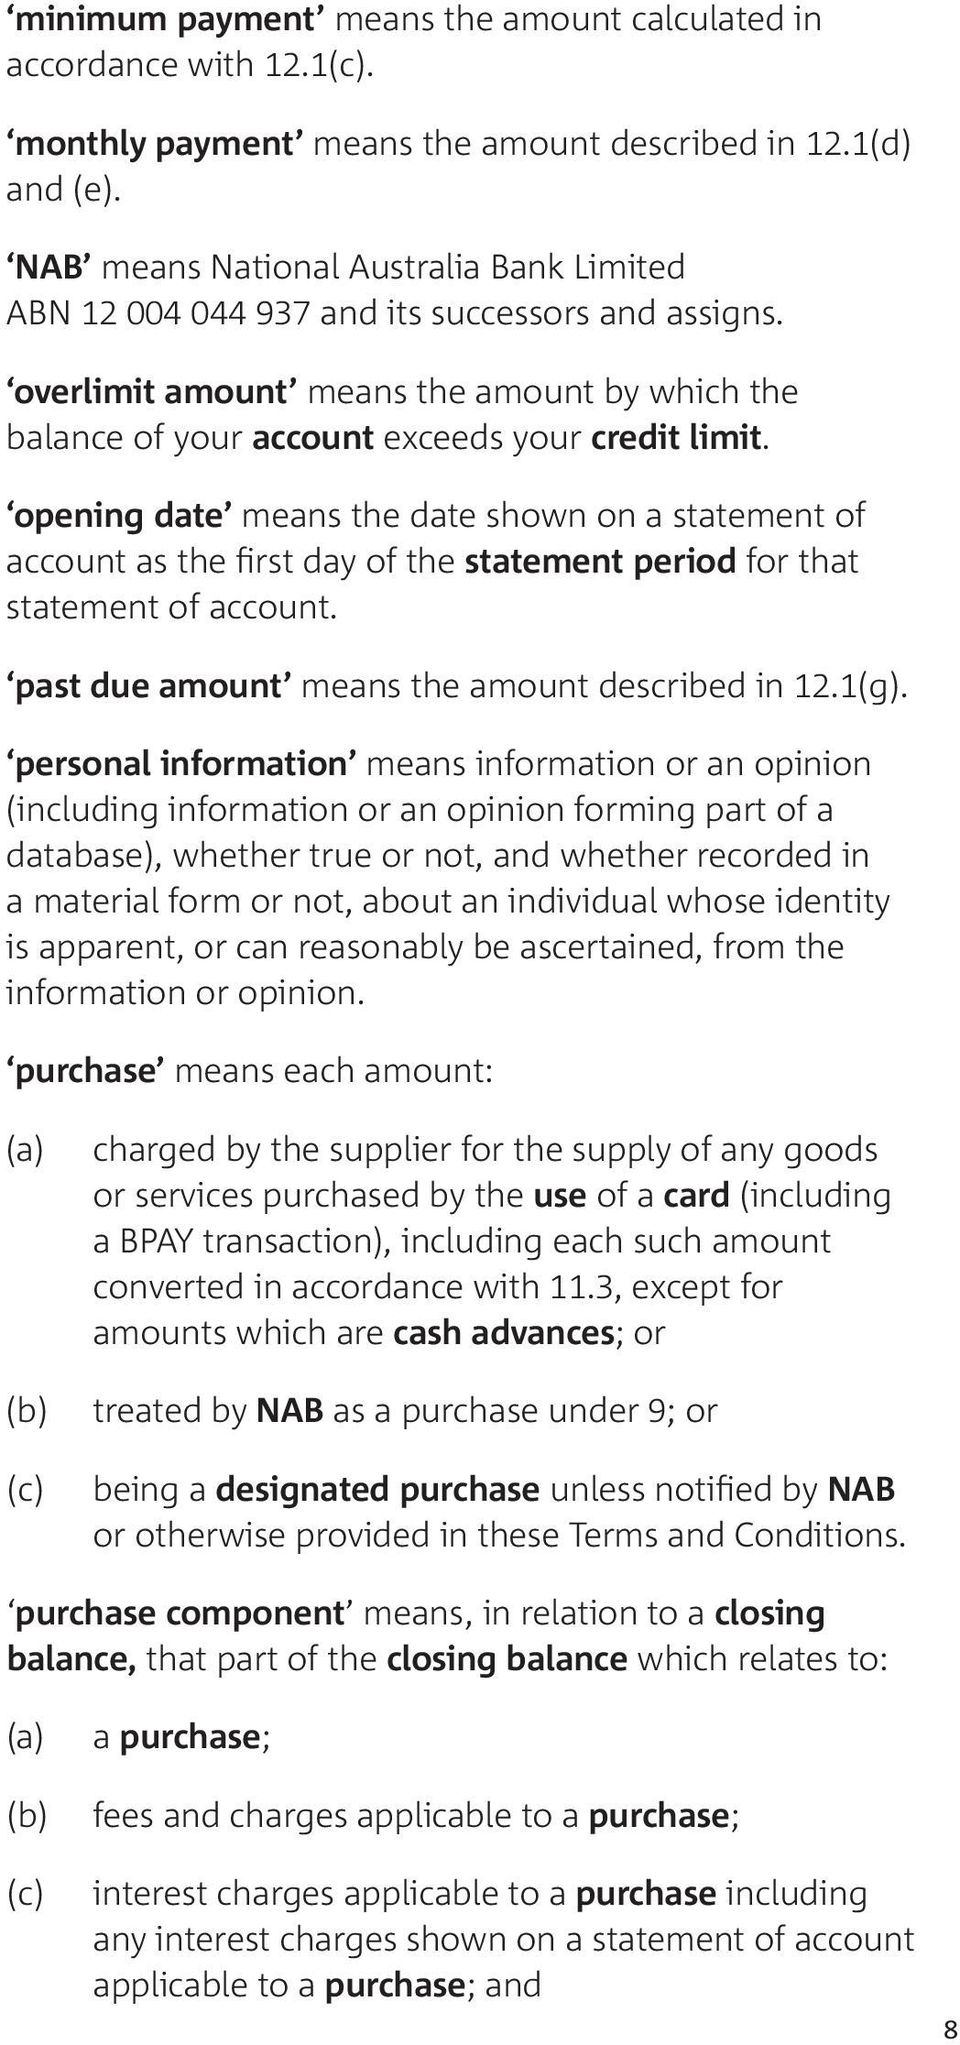 opening date means the date shown on a statement of account as the first day of the statement period for that statement of account. past due amount means the amount described in 12.1(g).